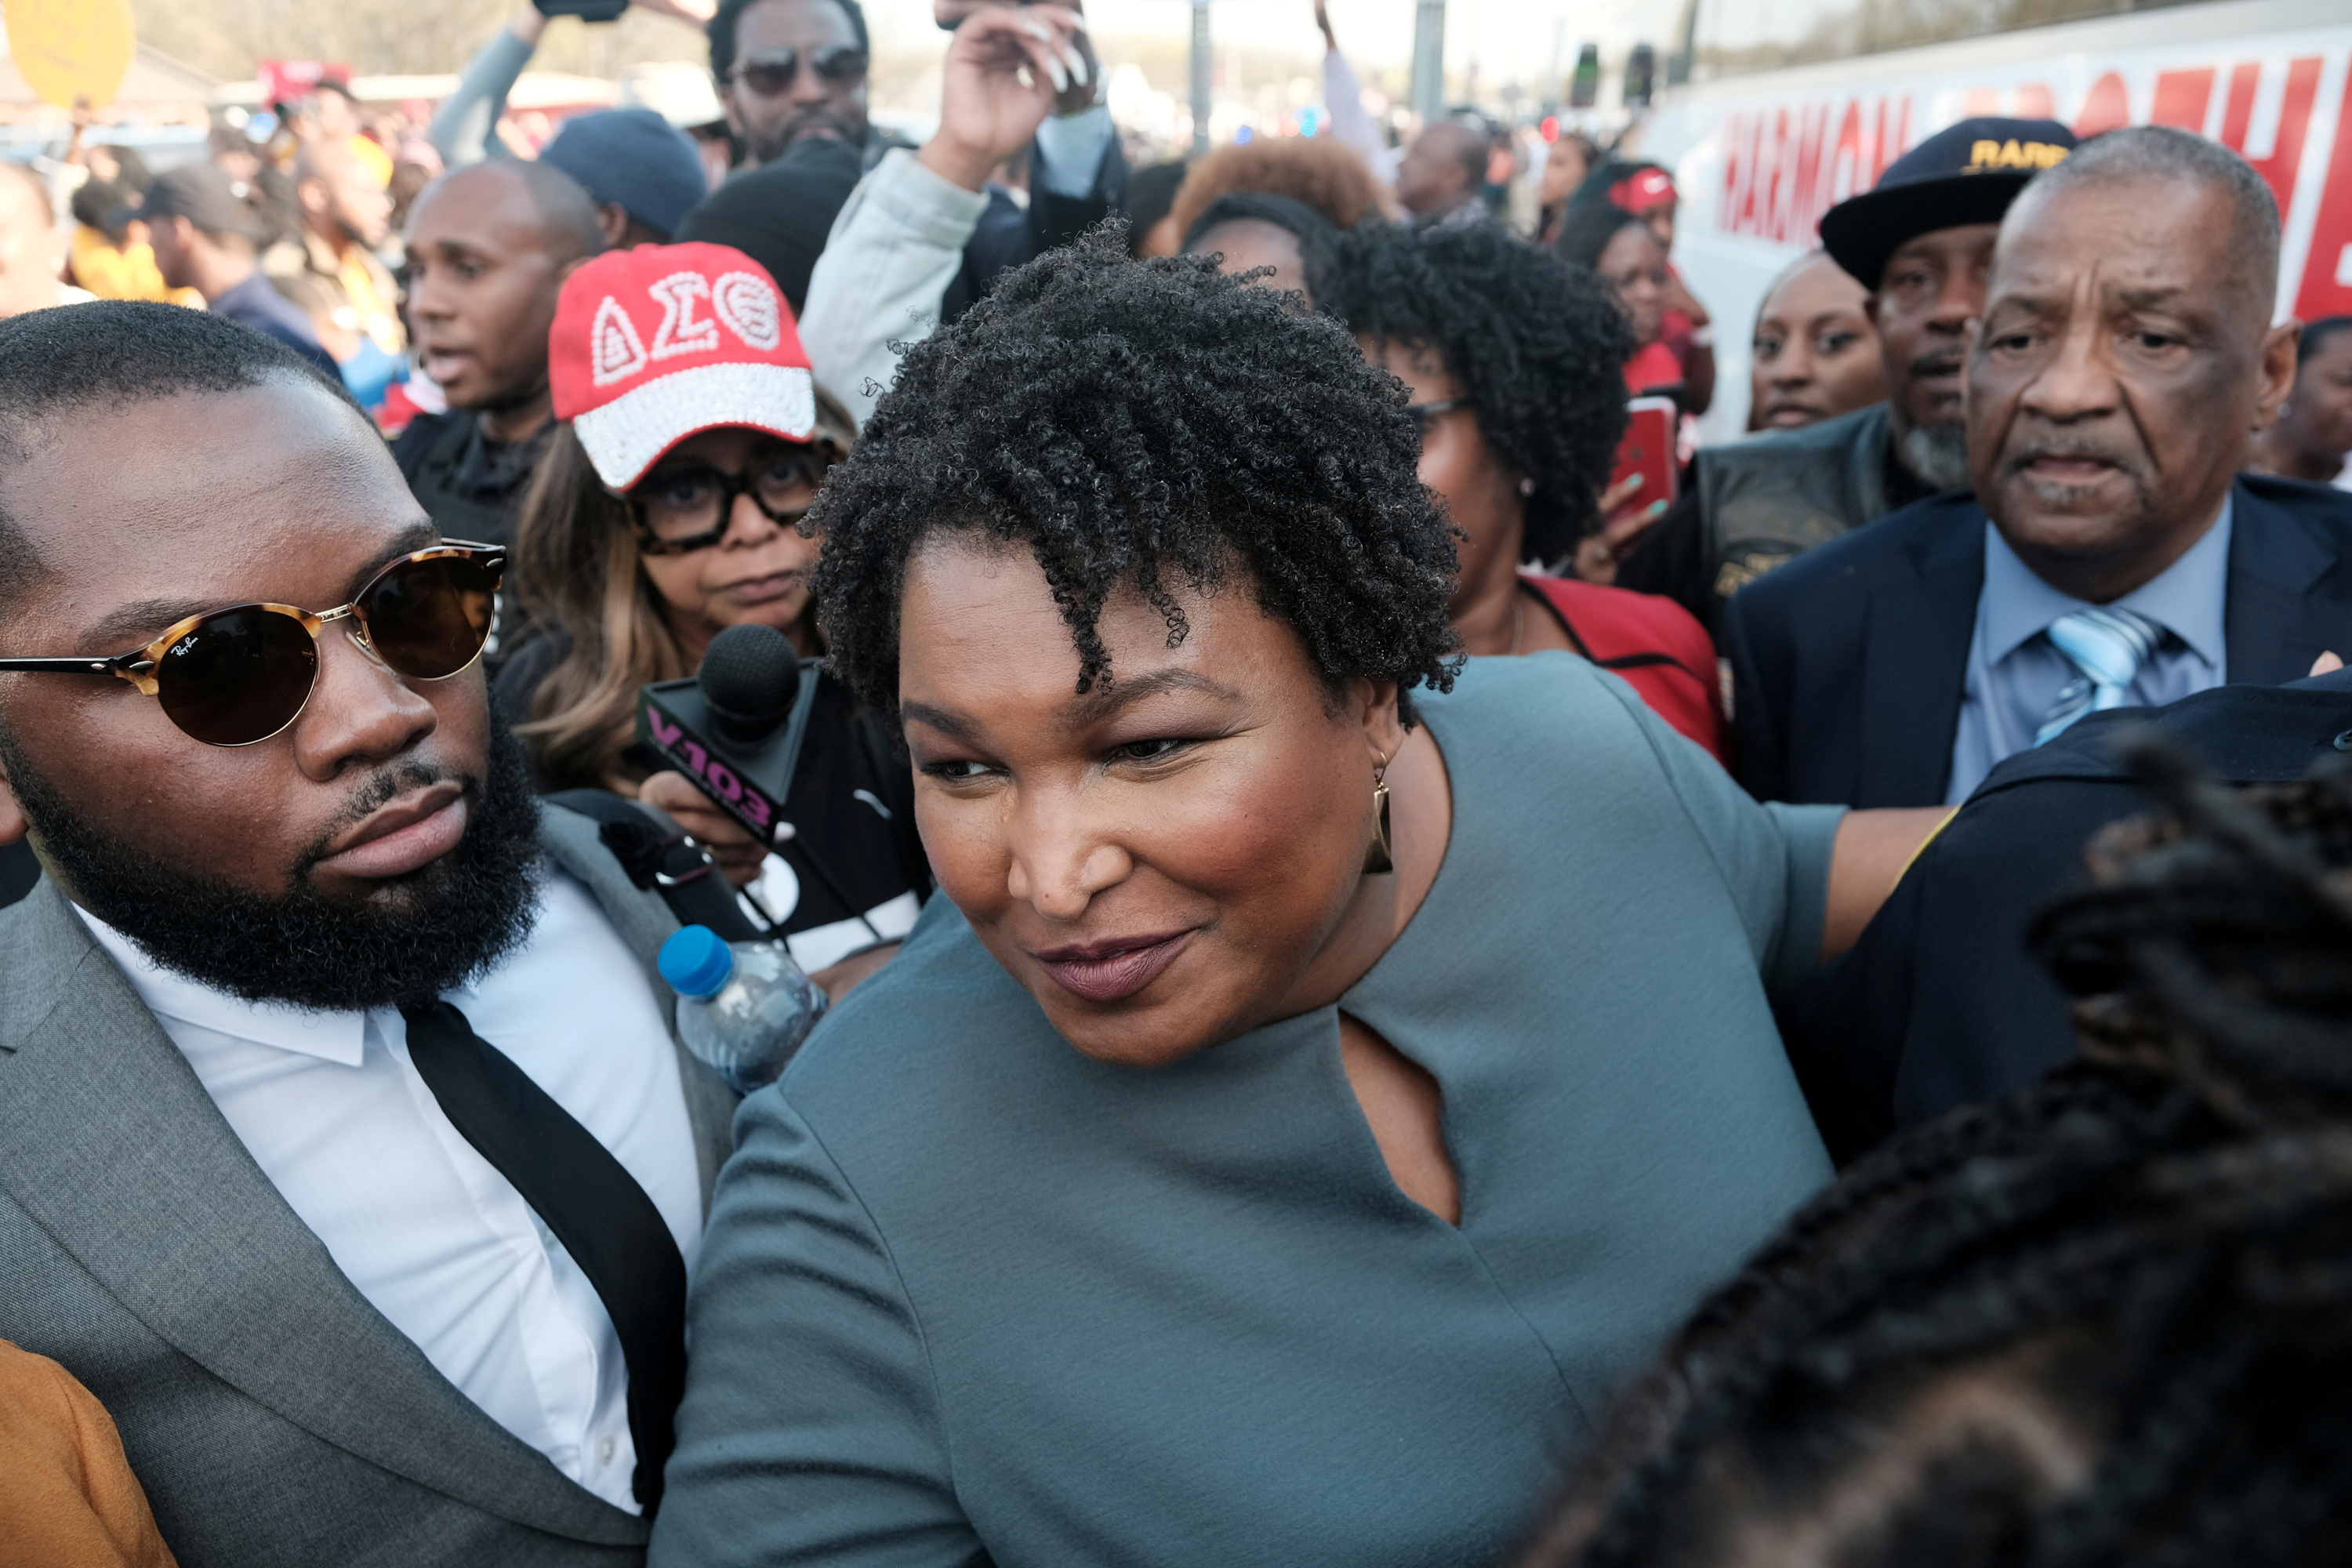 Stacey Abrams speaks with member of the press after crossing the the Edmund Pettus Bridge commemorating the 55th anniversary of the 